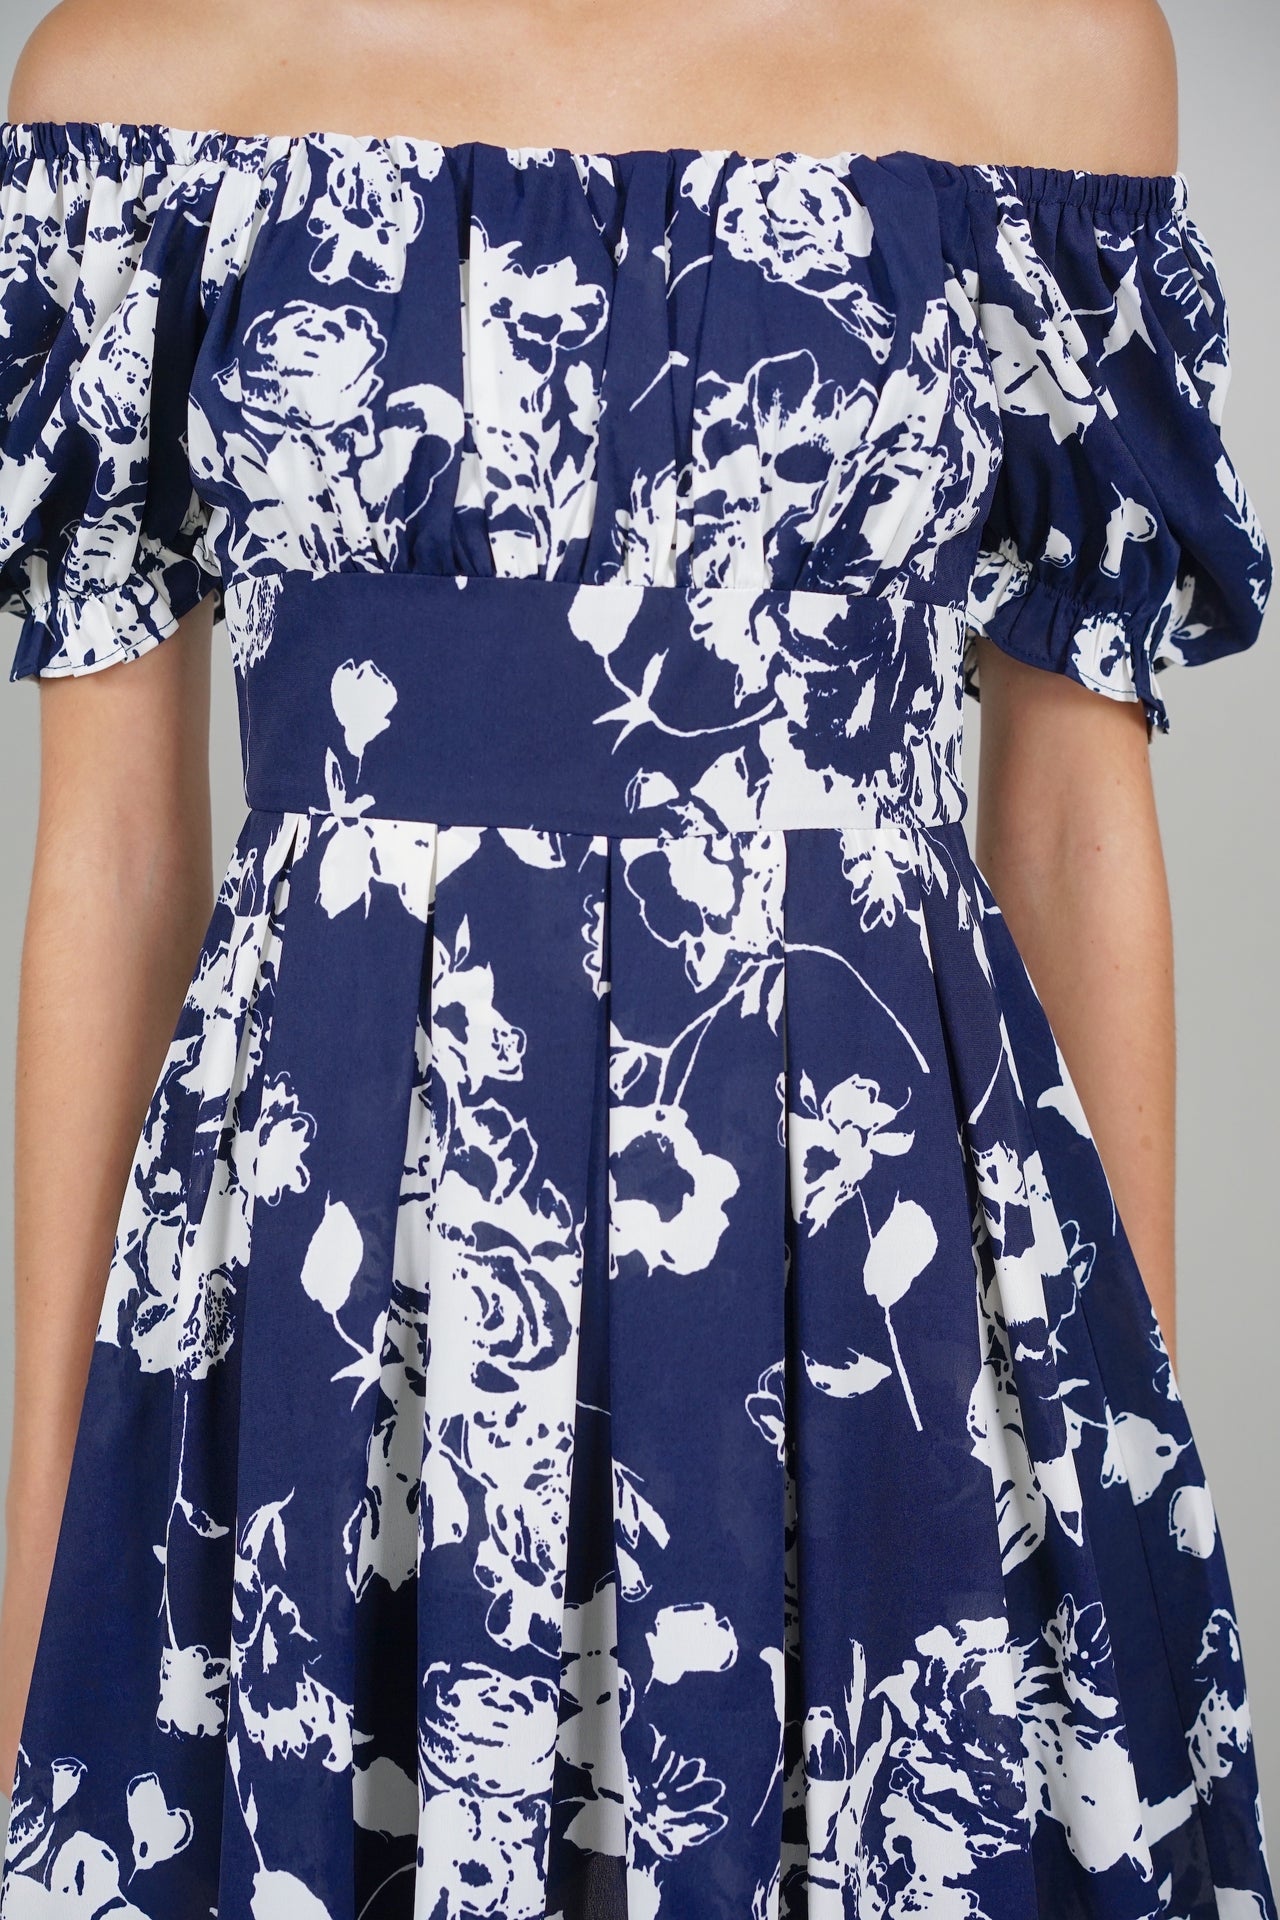 Jas Gathered Romper in Navy Floral